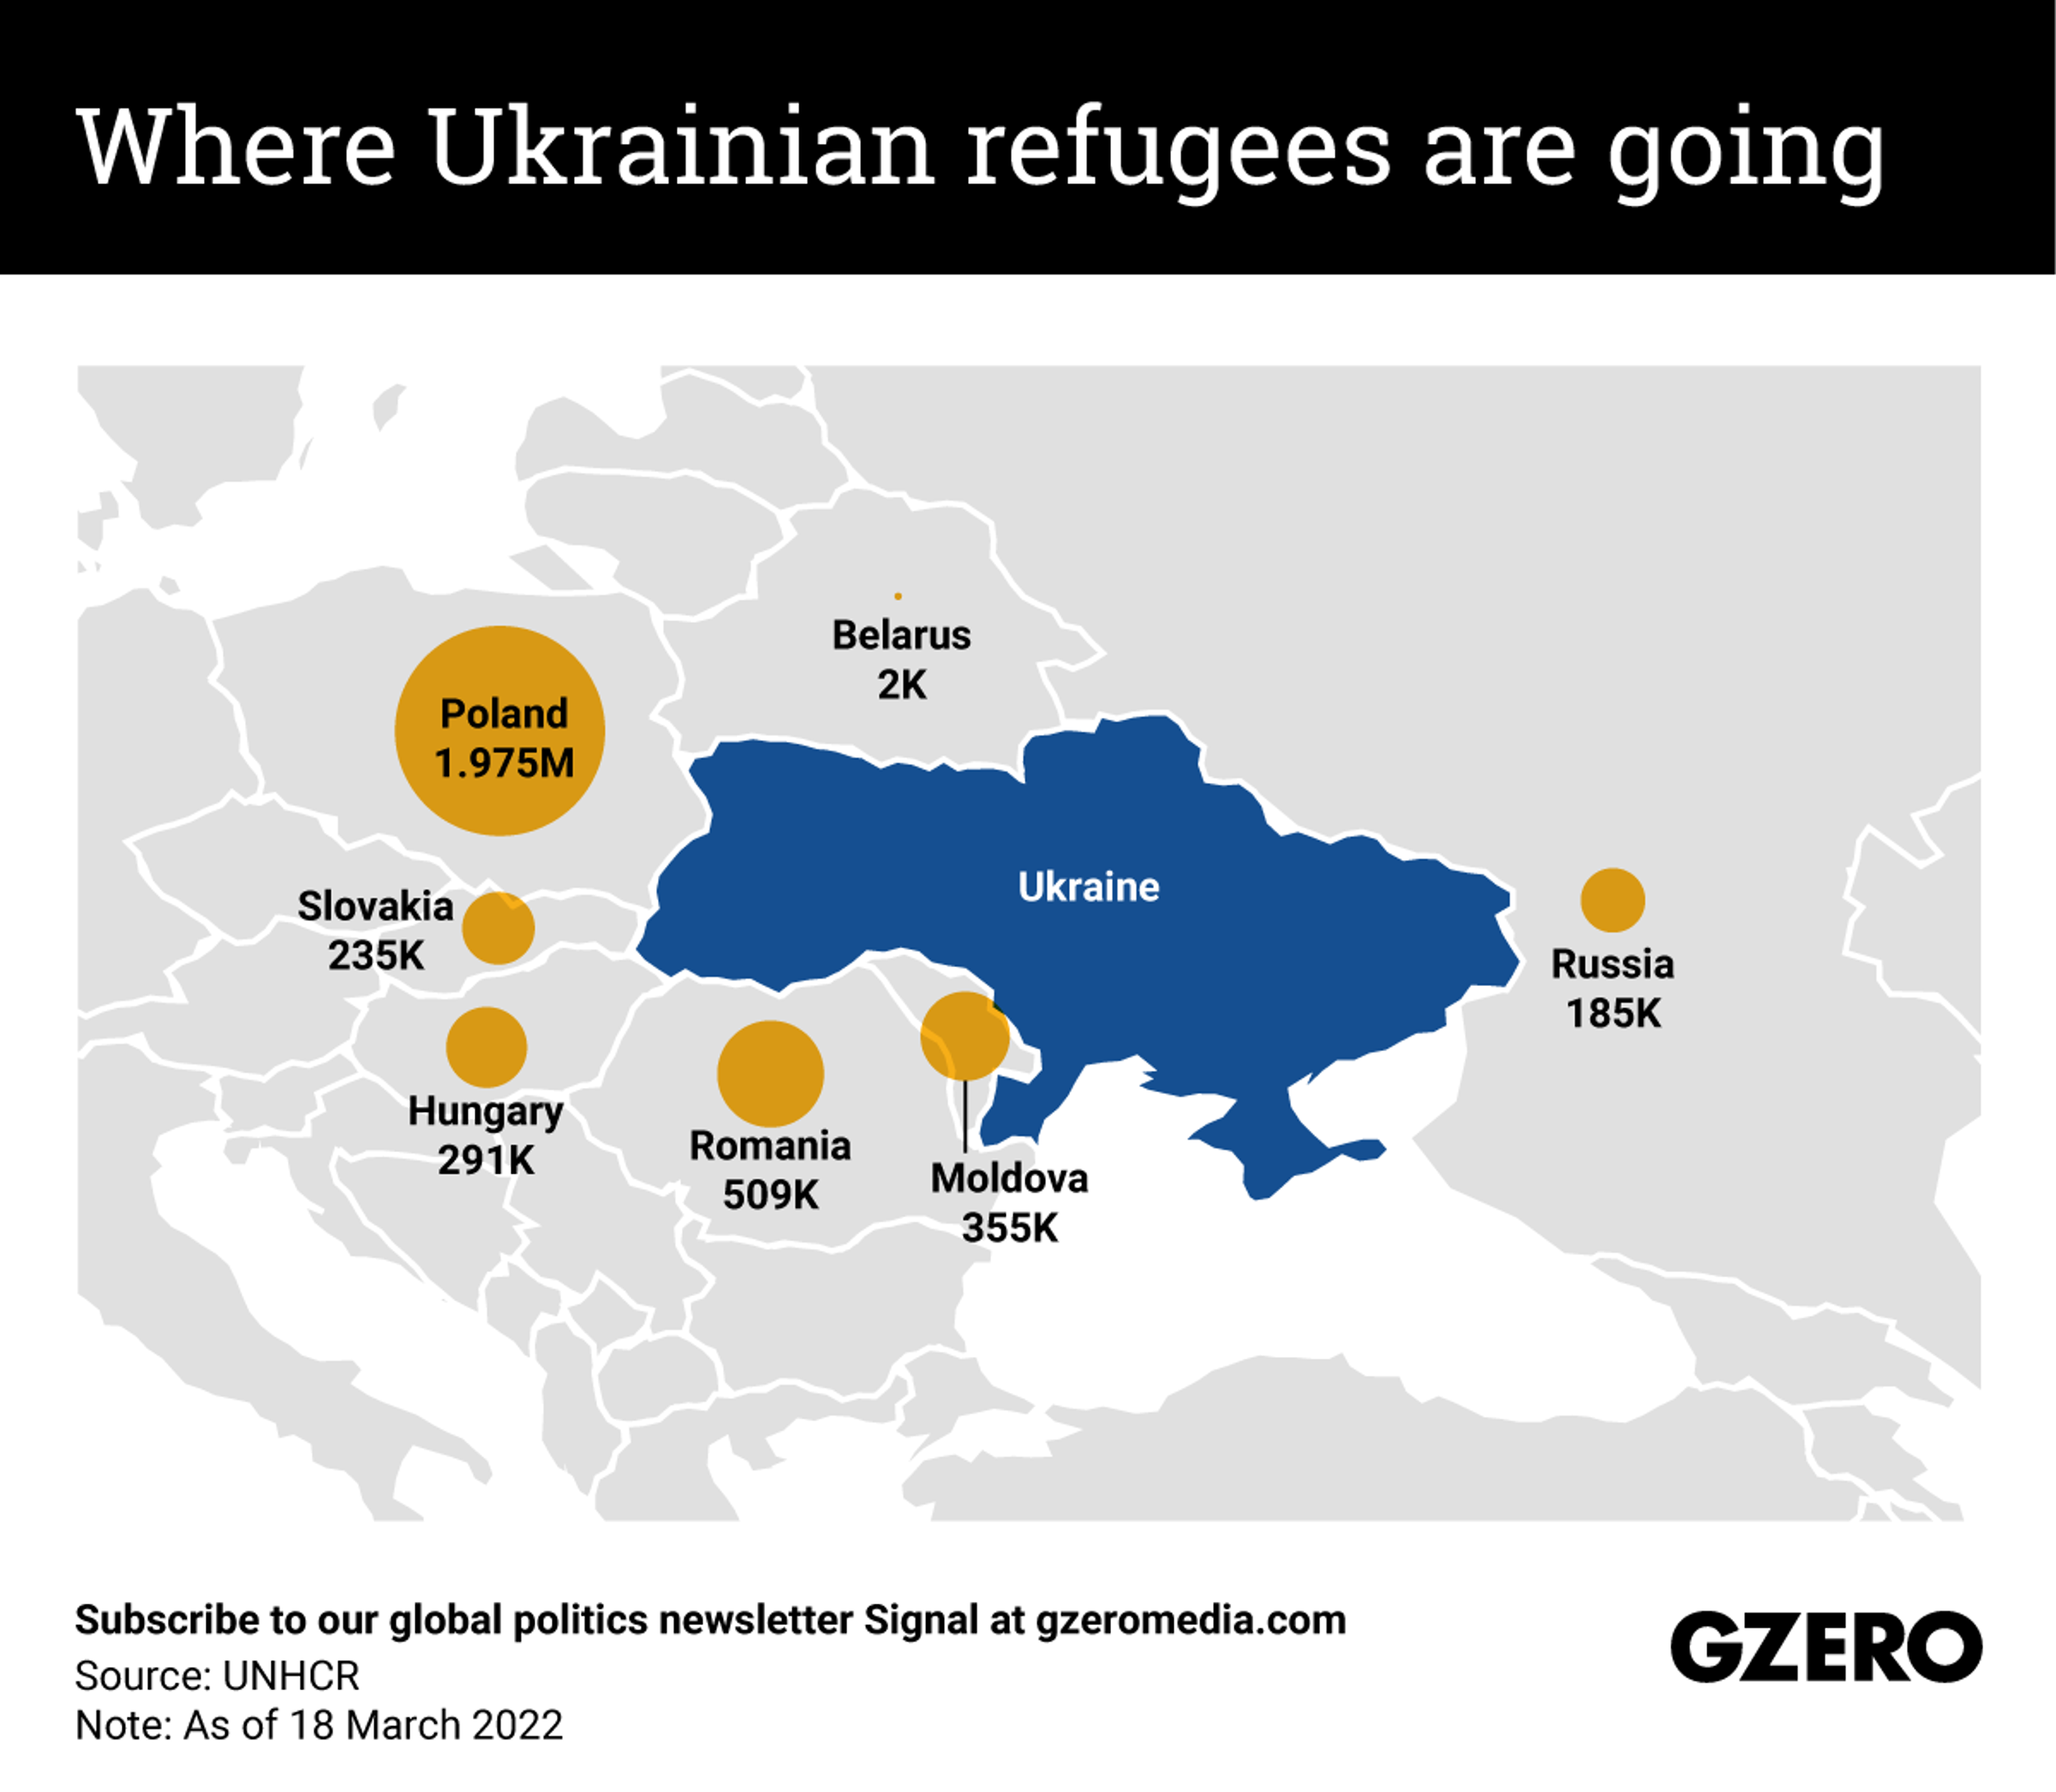 The Graphic Truth: Where Ukrainian refugees are going